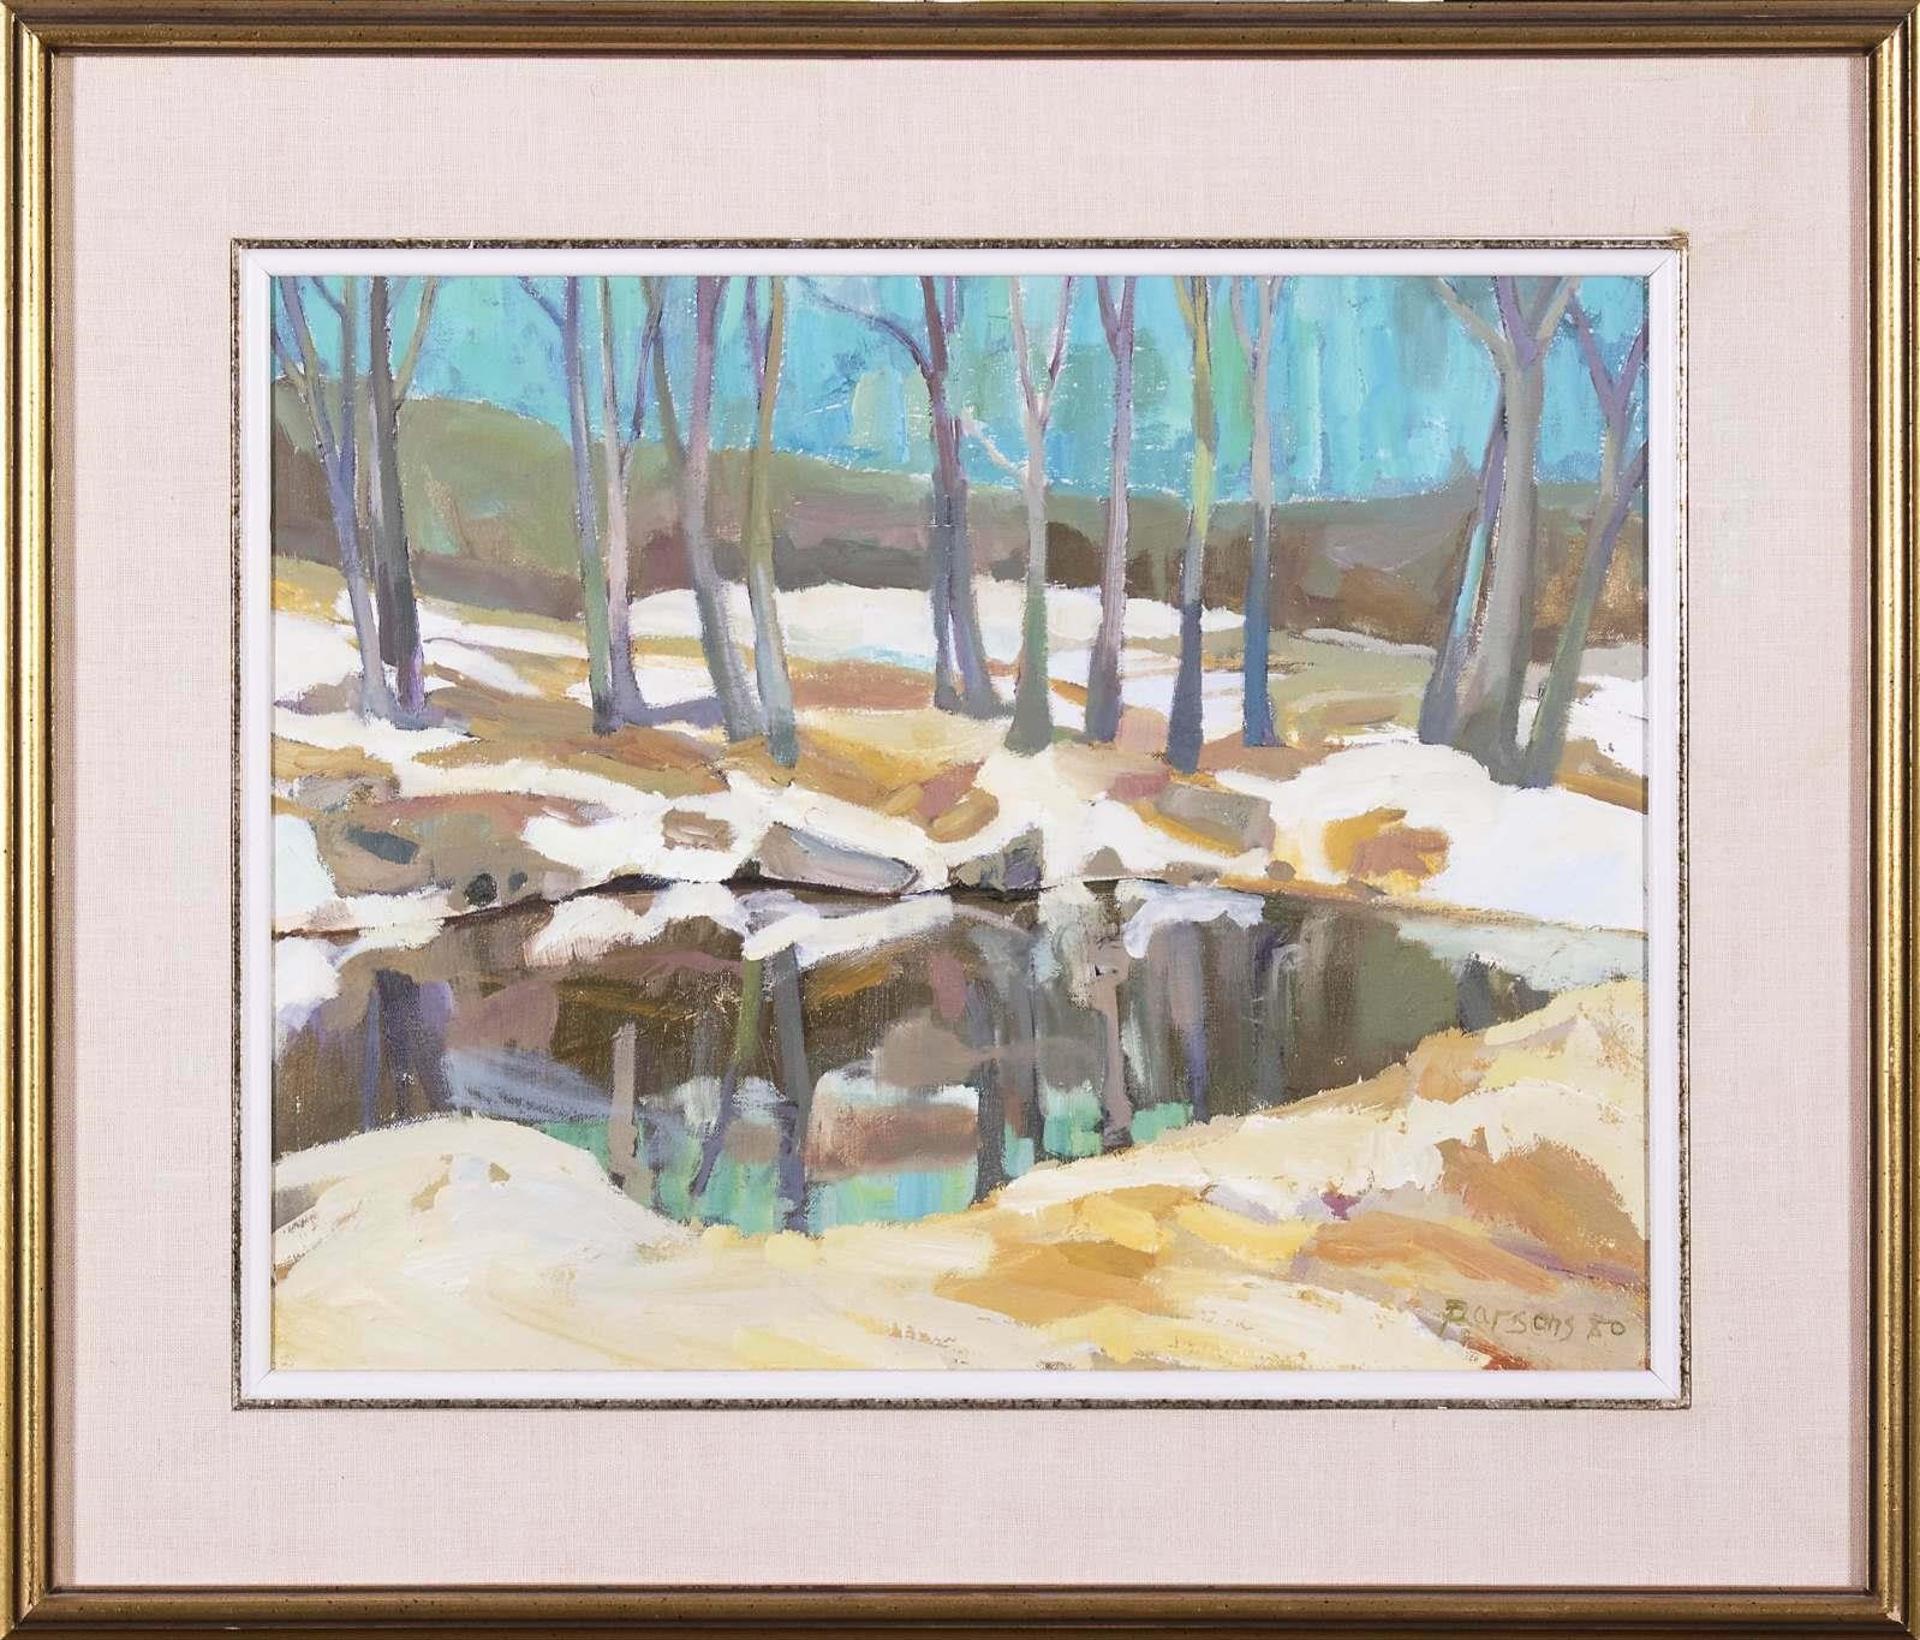 Dorothy Dee Parsons Dewit (1924) - Untitled, Winter Landscape - Trees Reflecting in a Pond; 1980